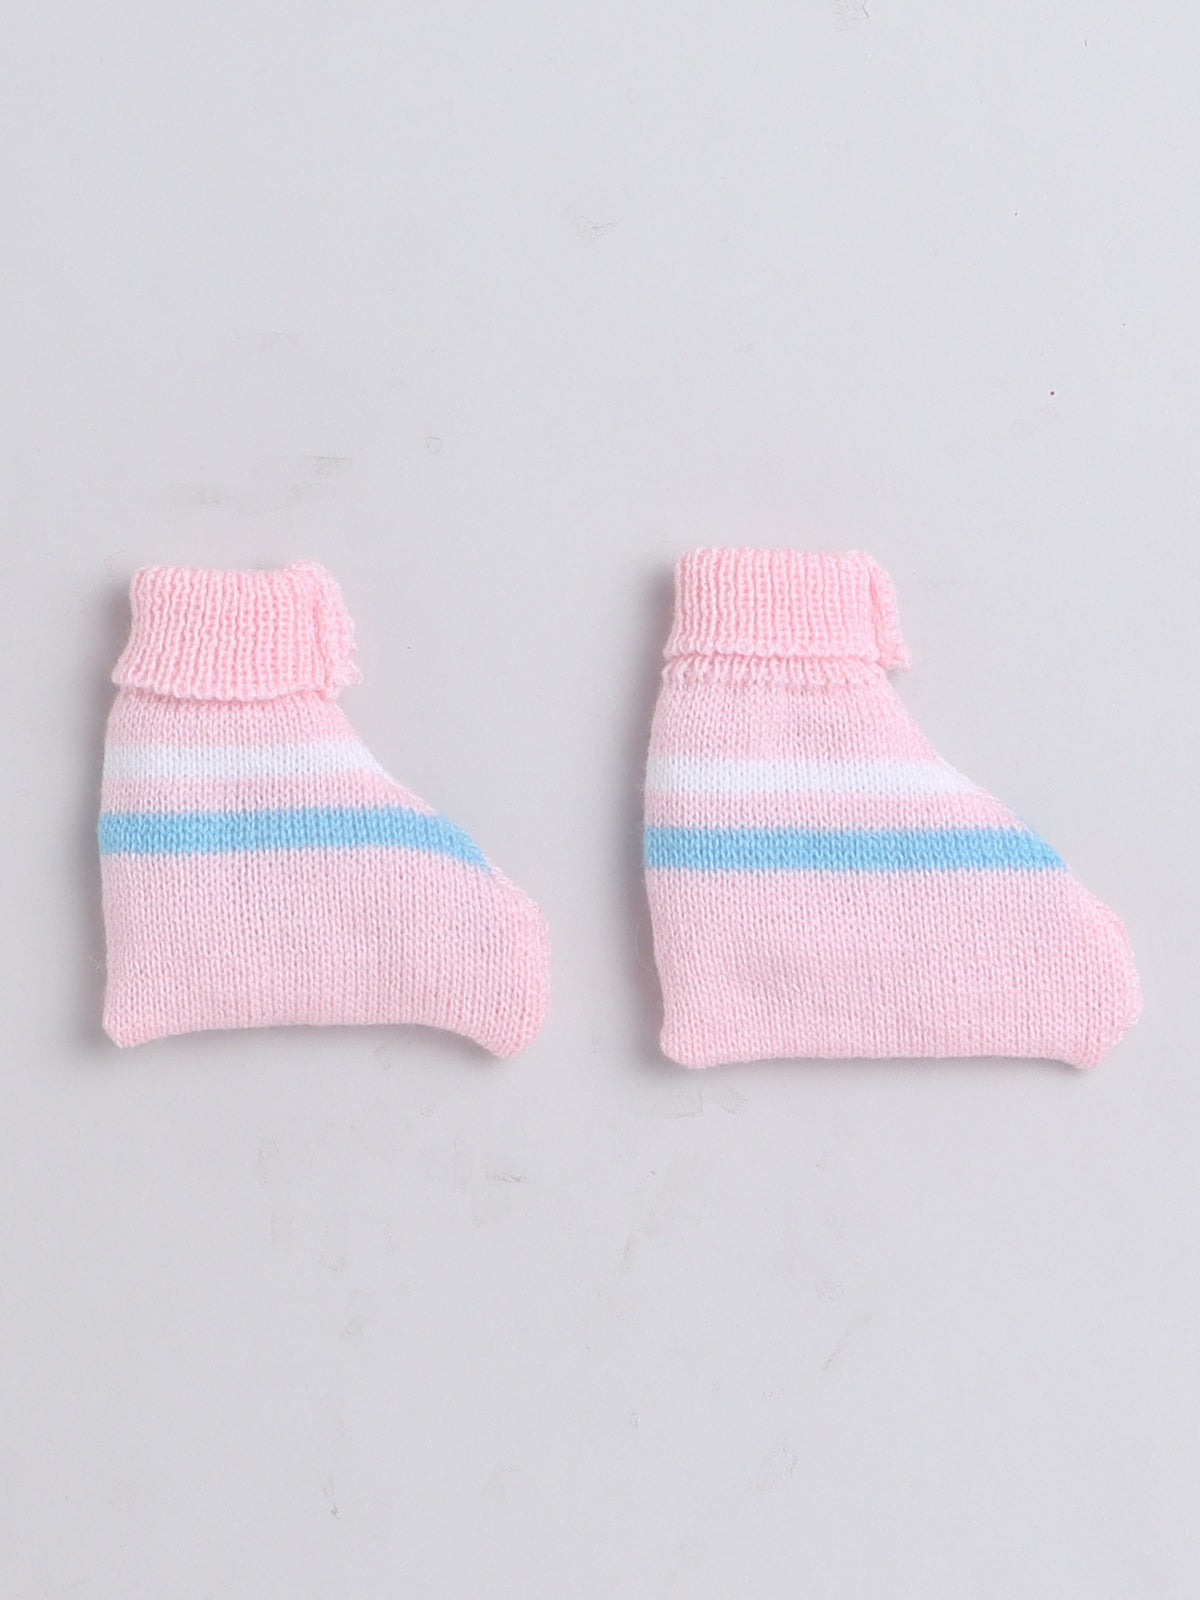 4 Pcs Sweater Full Sleeve Colorblock pattern with matching caps, Socks and Pants for baby